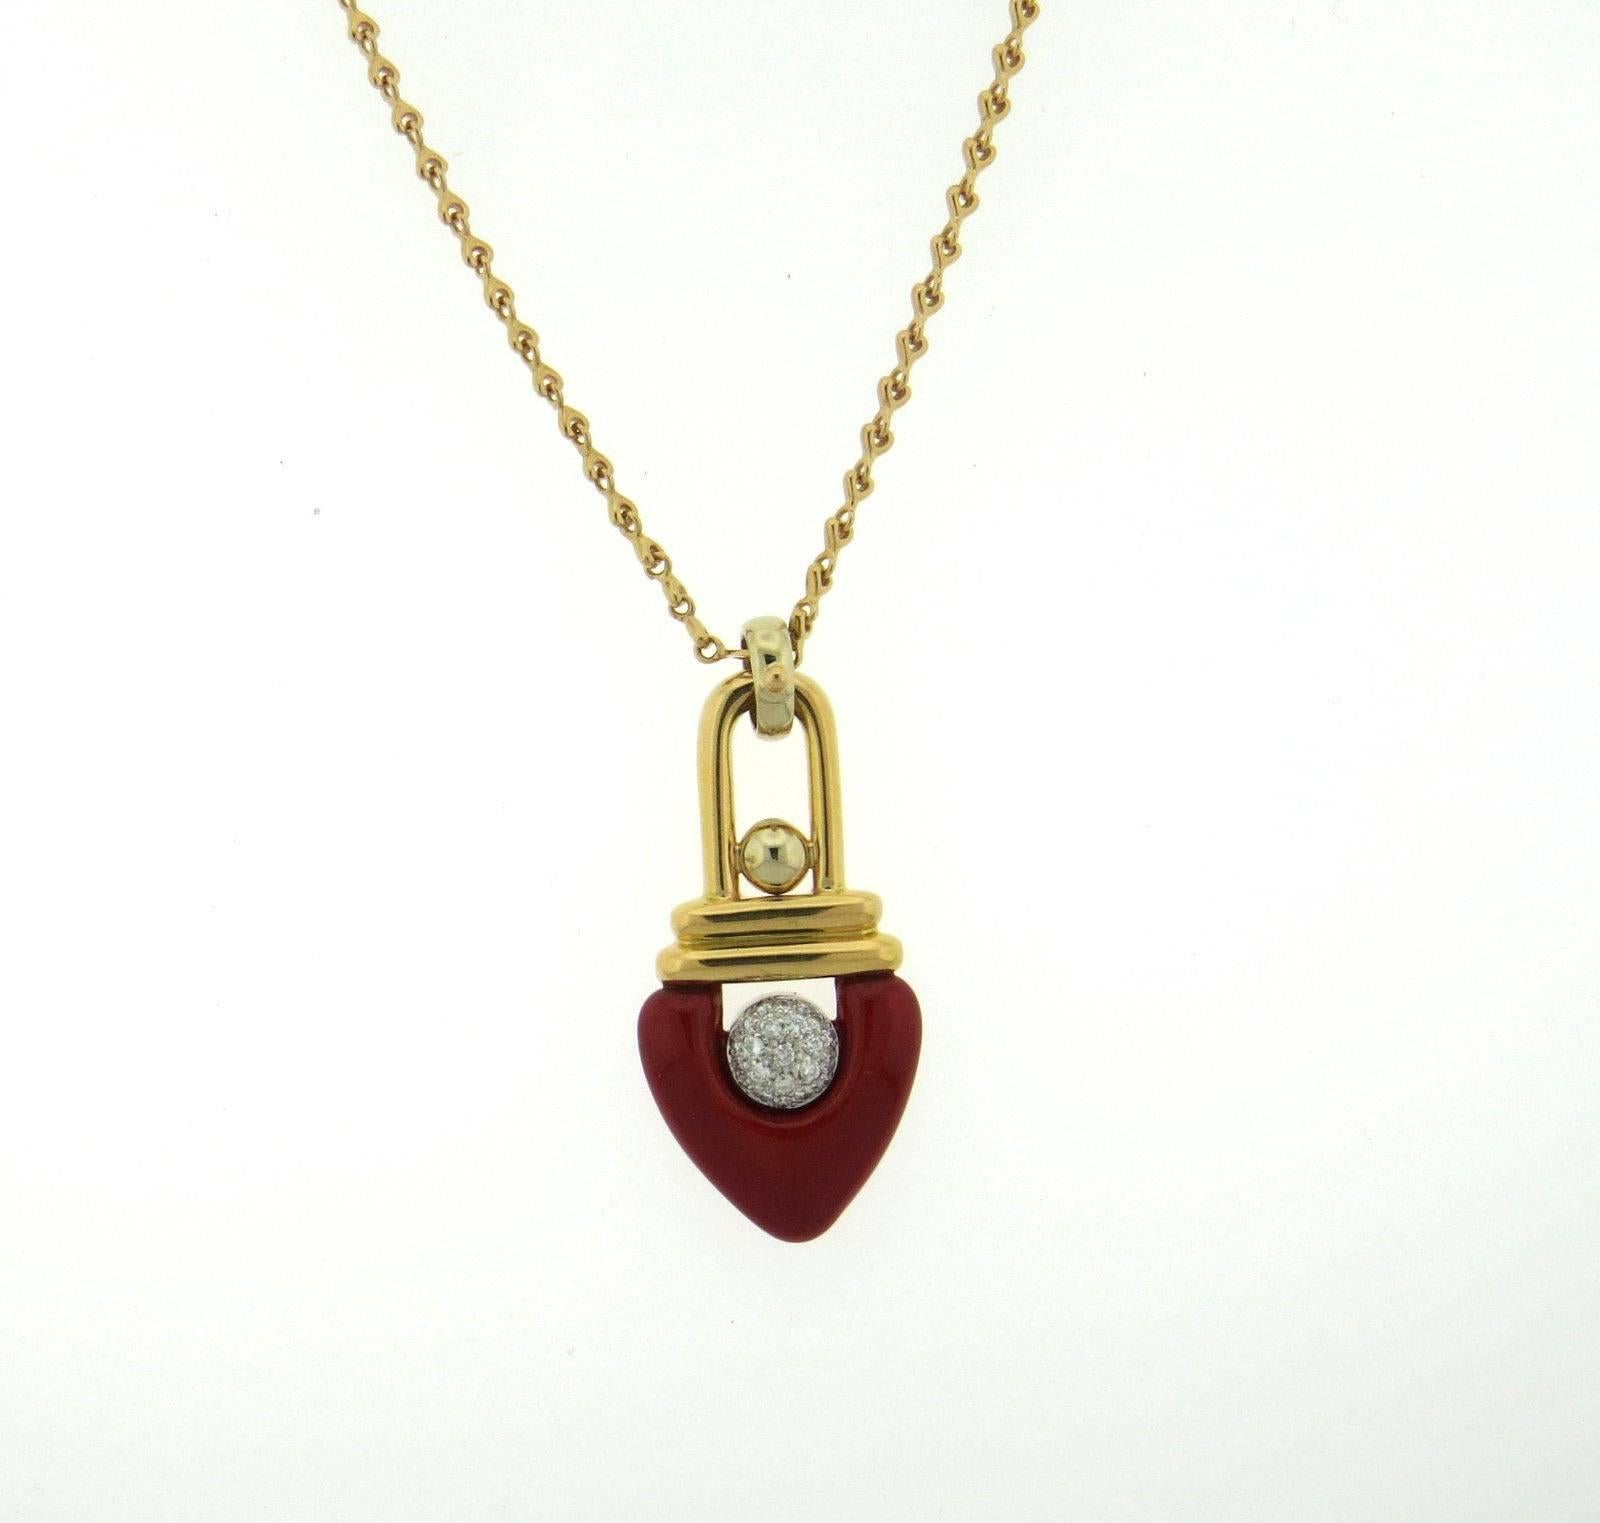 An 18k gold necklace adorned with a 0.22ctw diamond and red enamel pendant. The necklace is 35